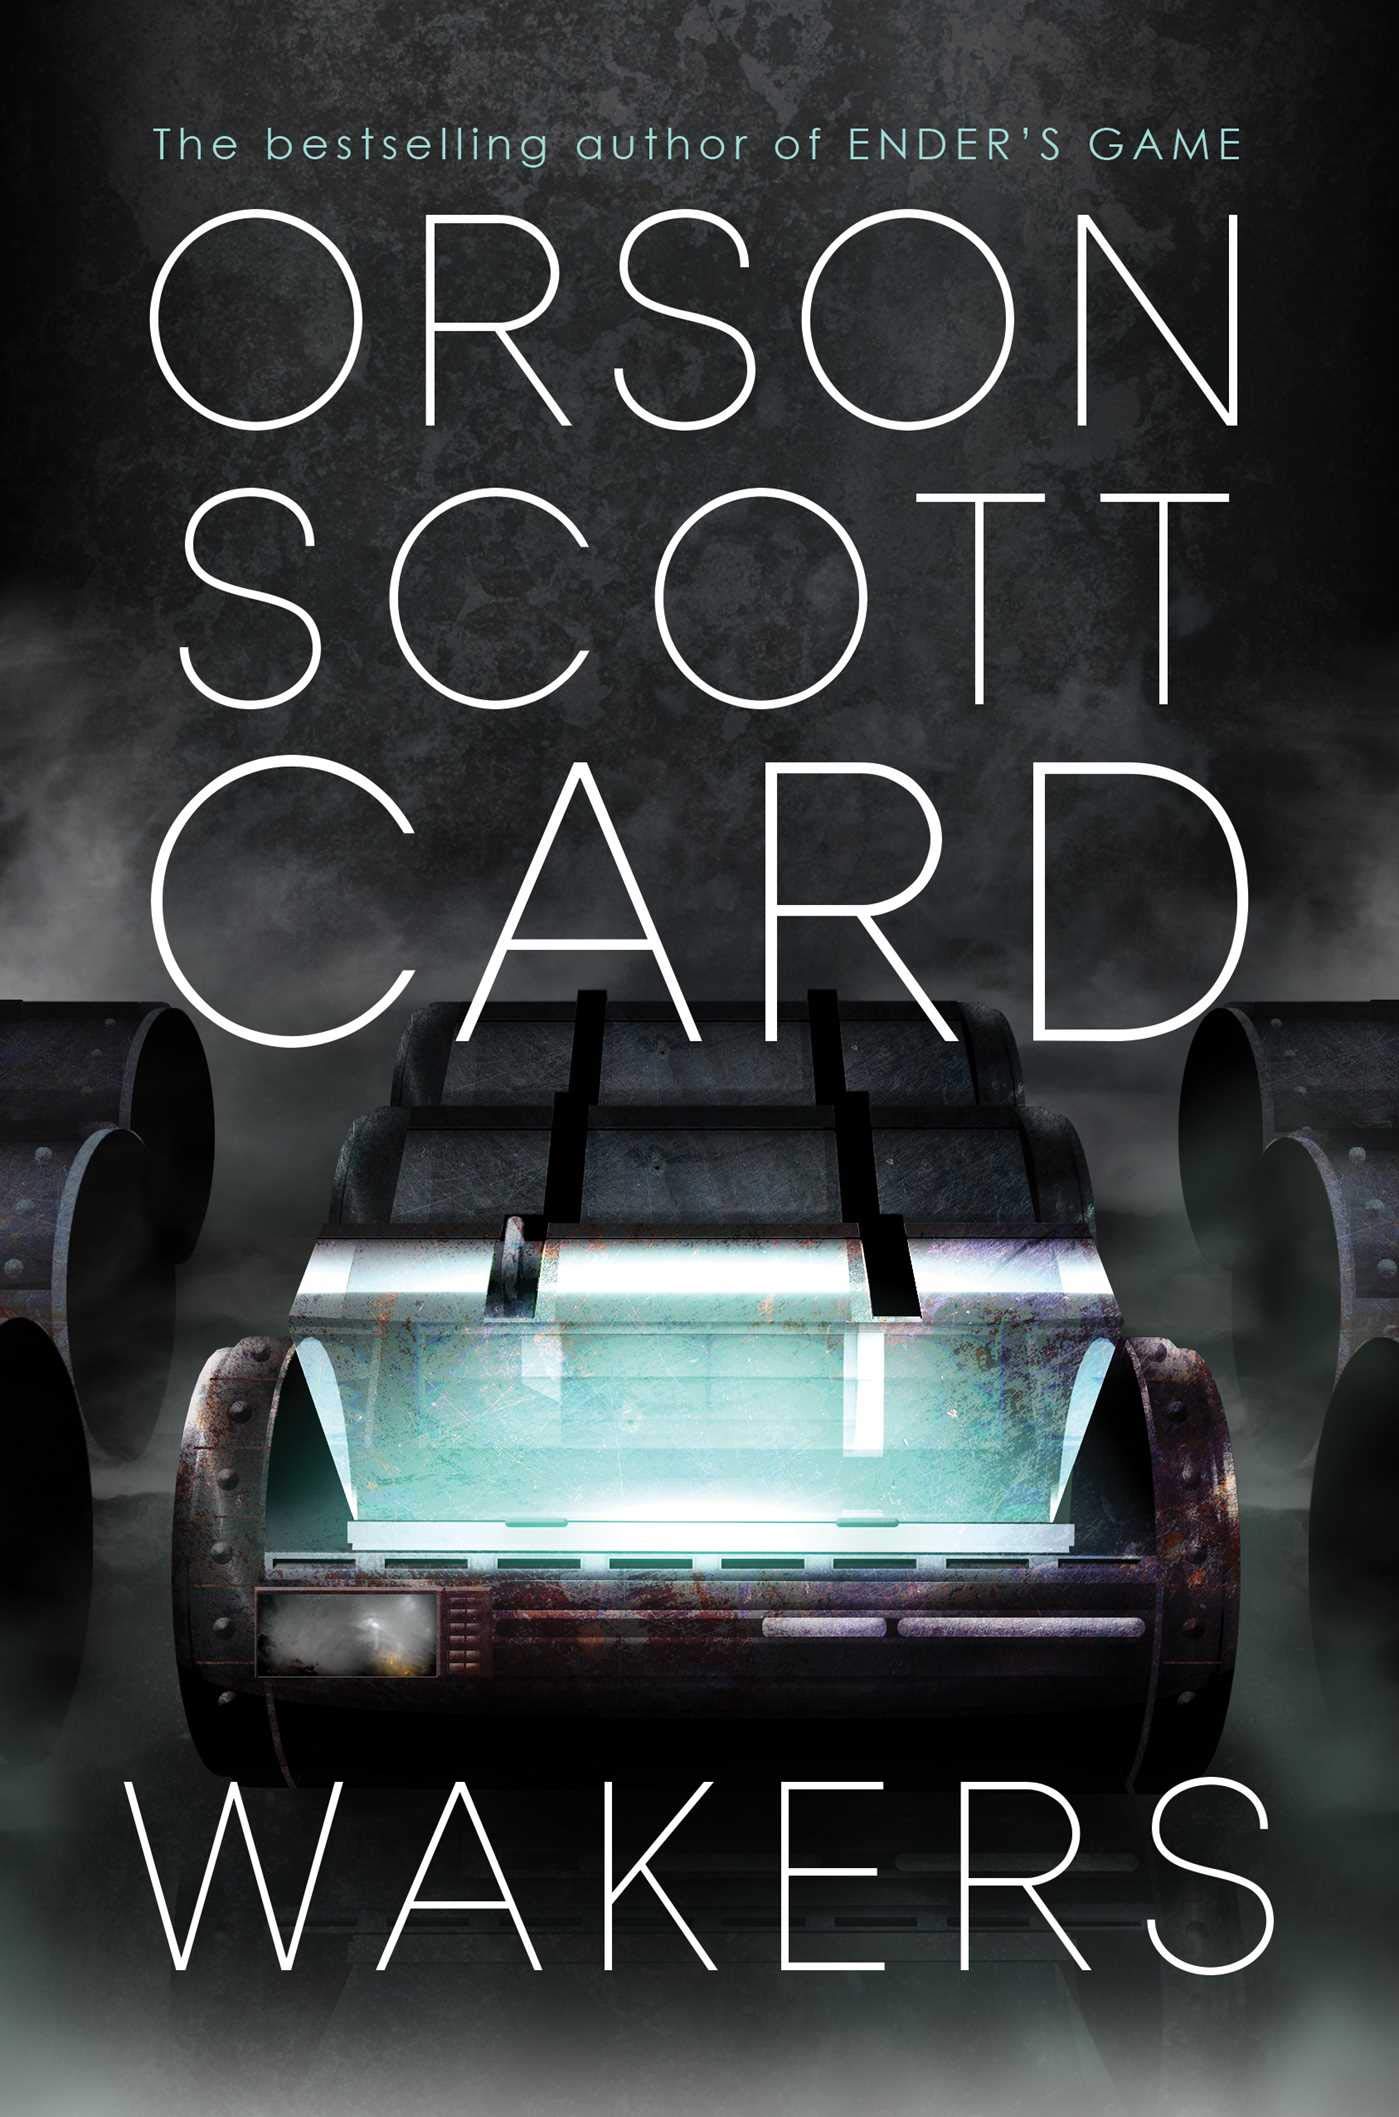 Cover of “Wakers” by Orson Scott Card